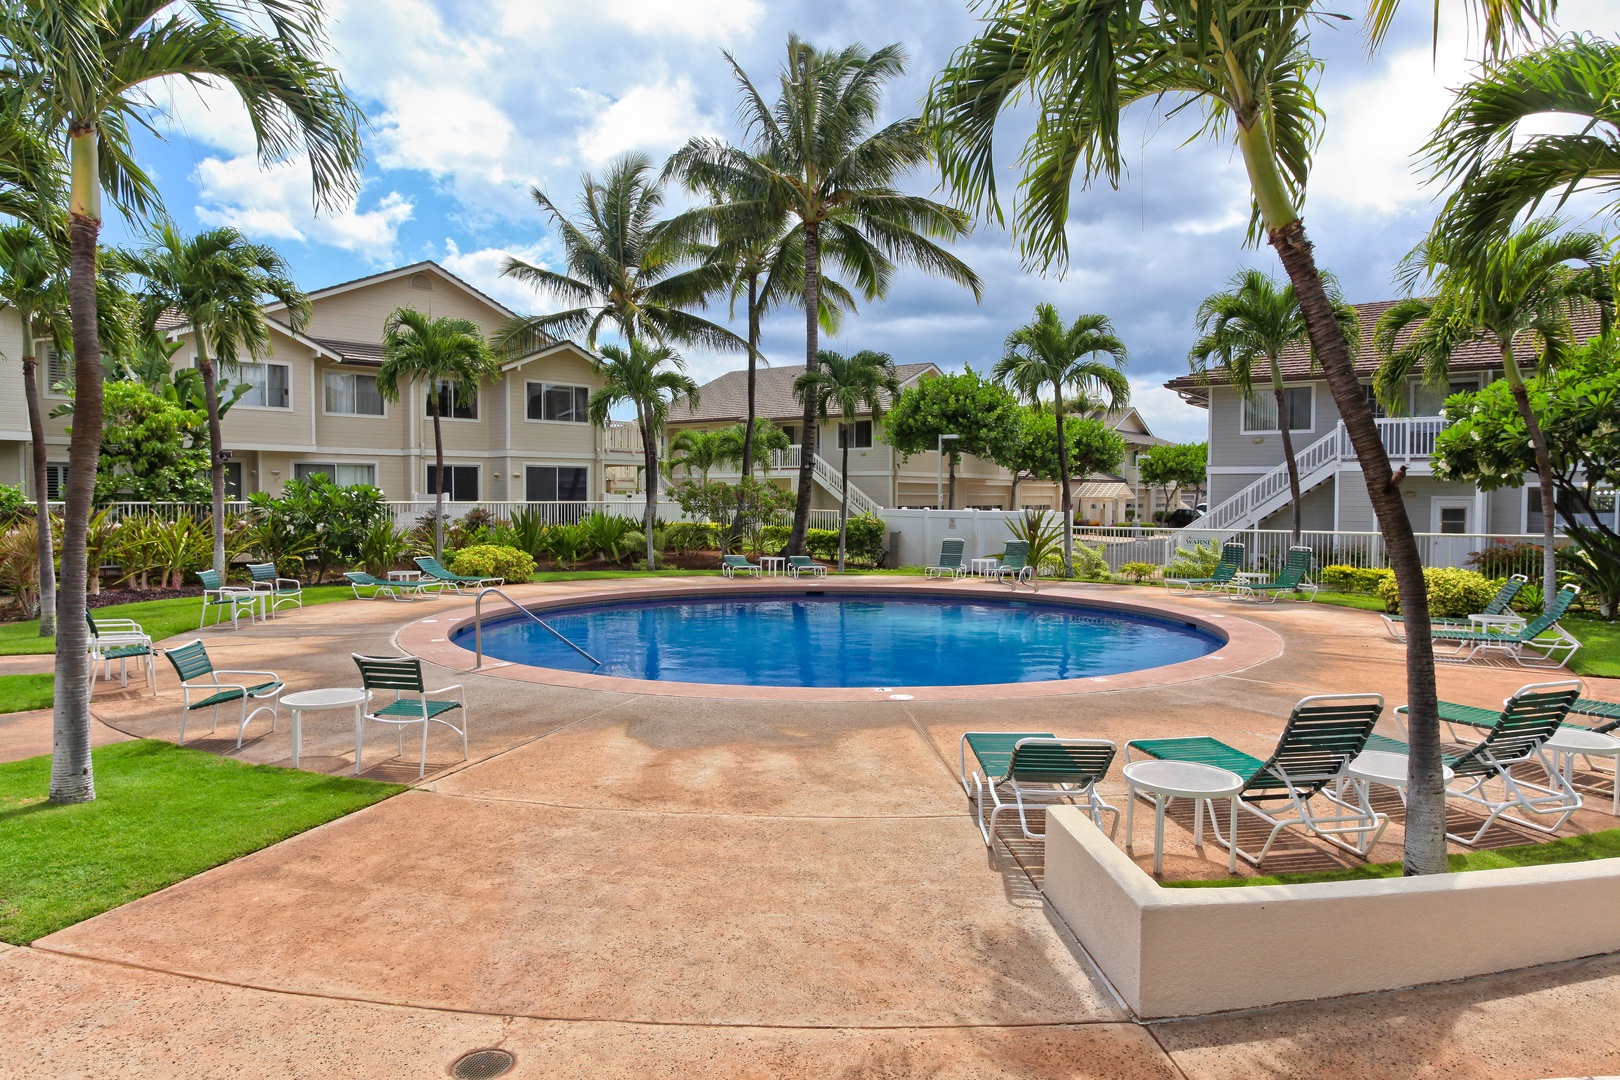 Kapolei Vacation Rentals, Fairways at Ko Olina 27H - The best vacations are on island time by the water.